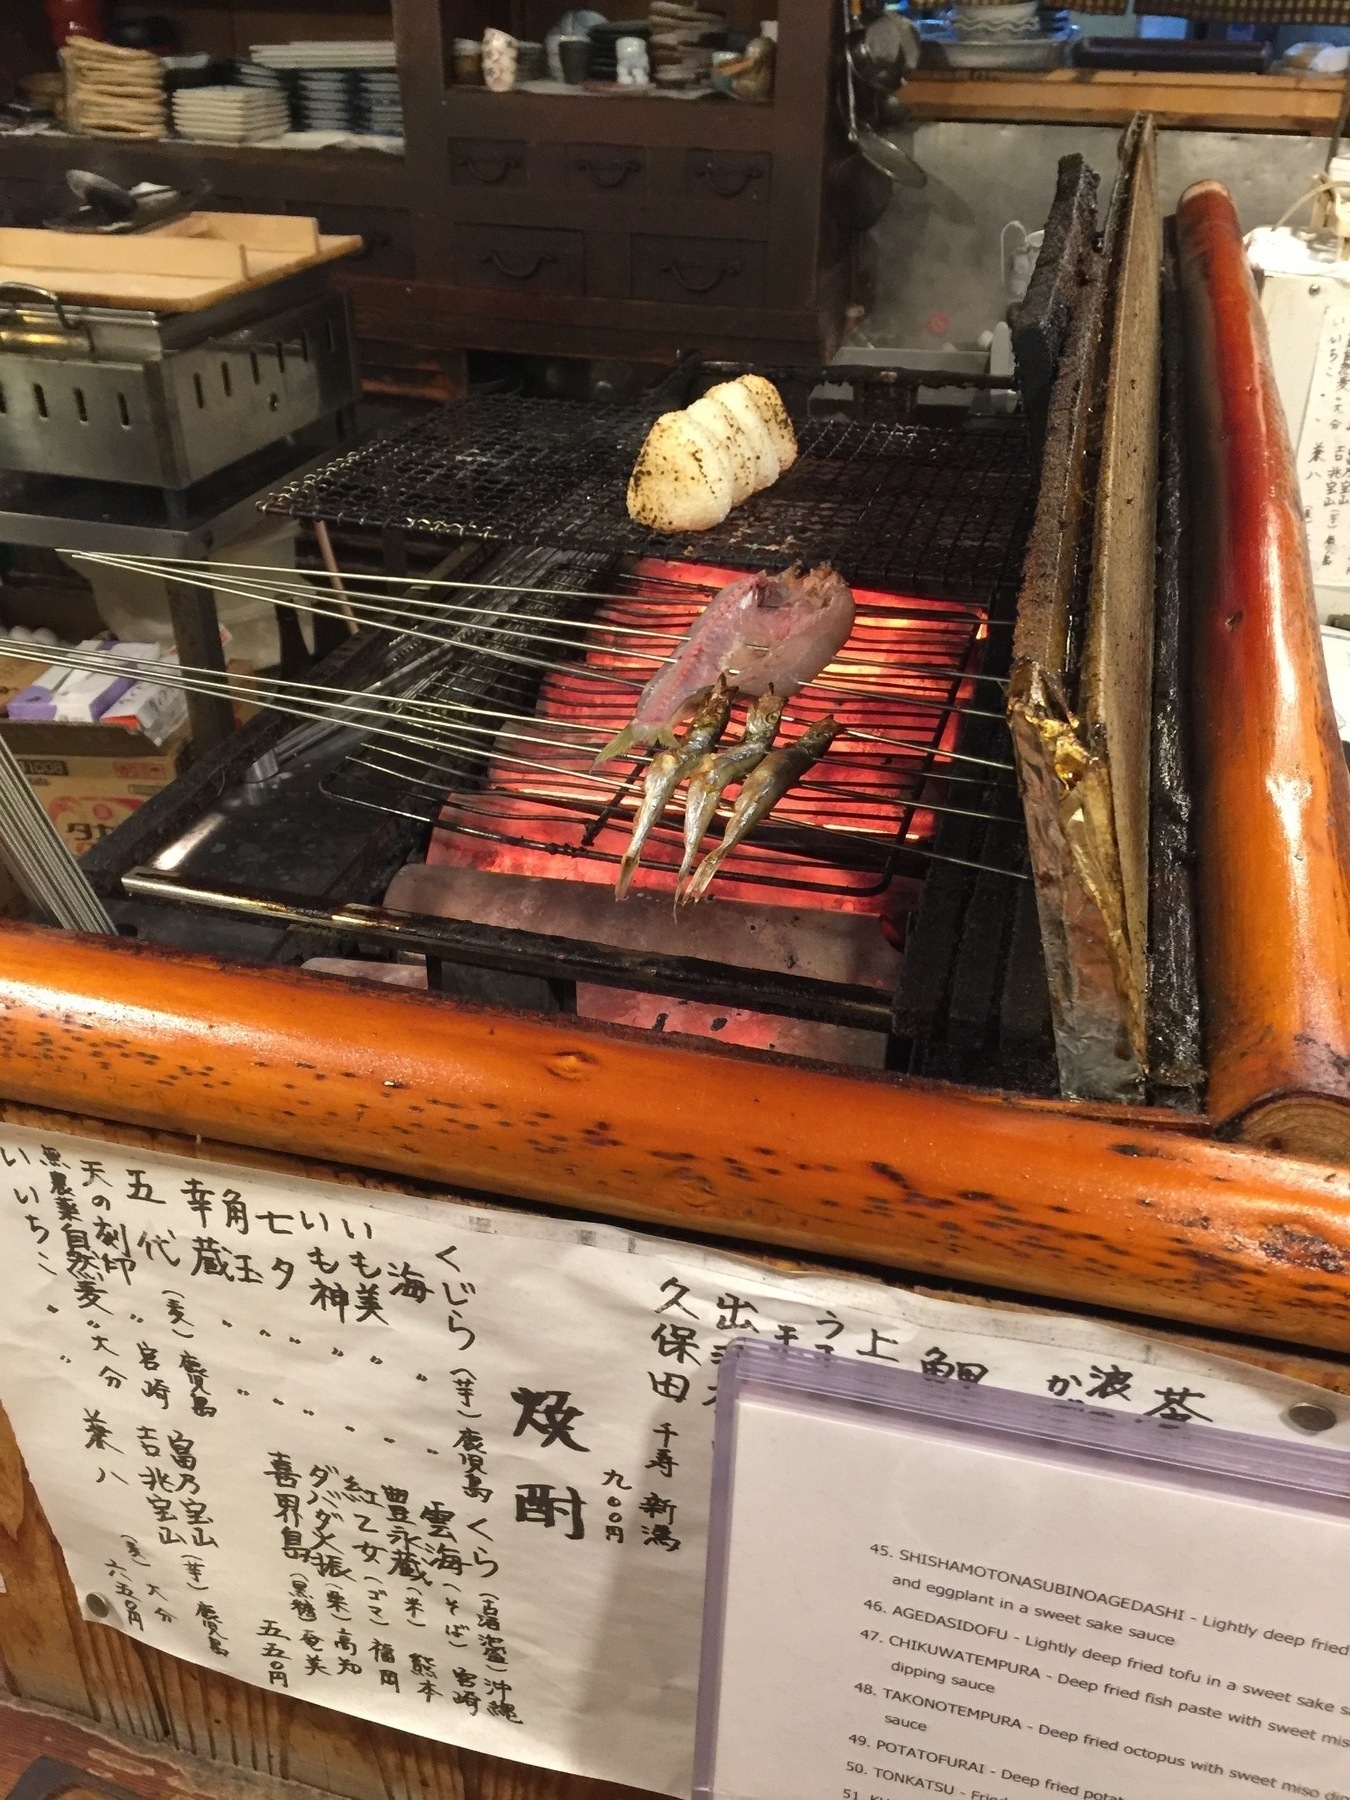 Grilling fish in a Japanese restaurant.